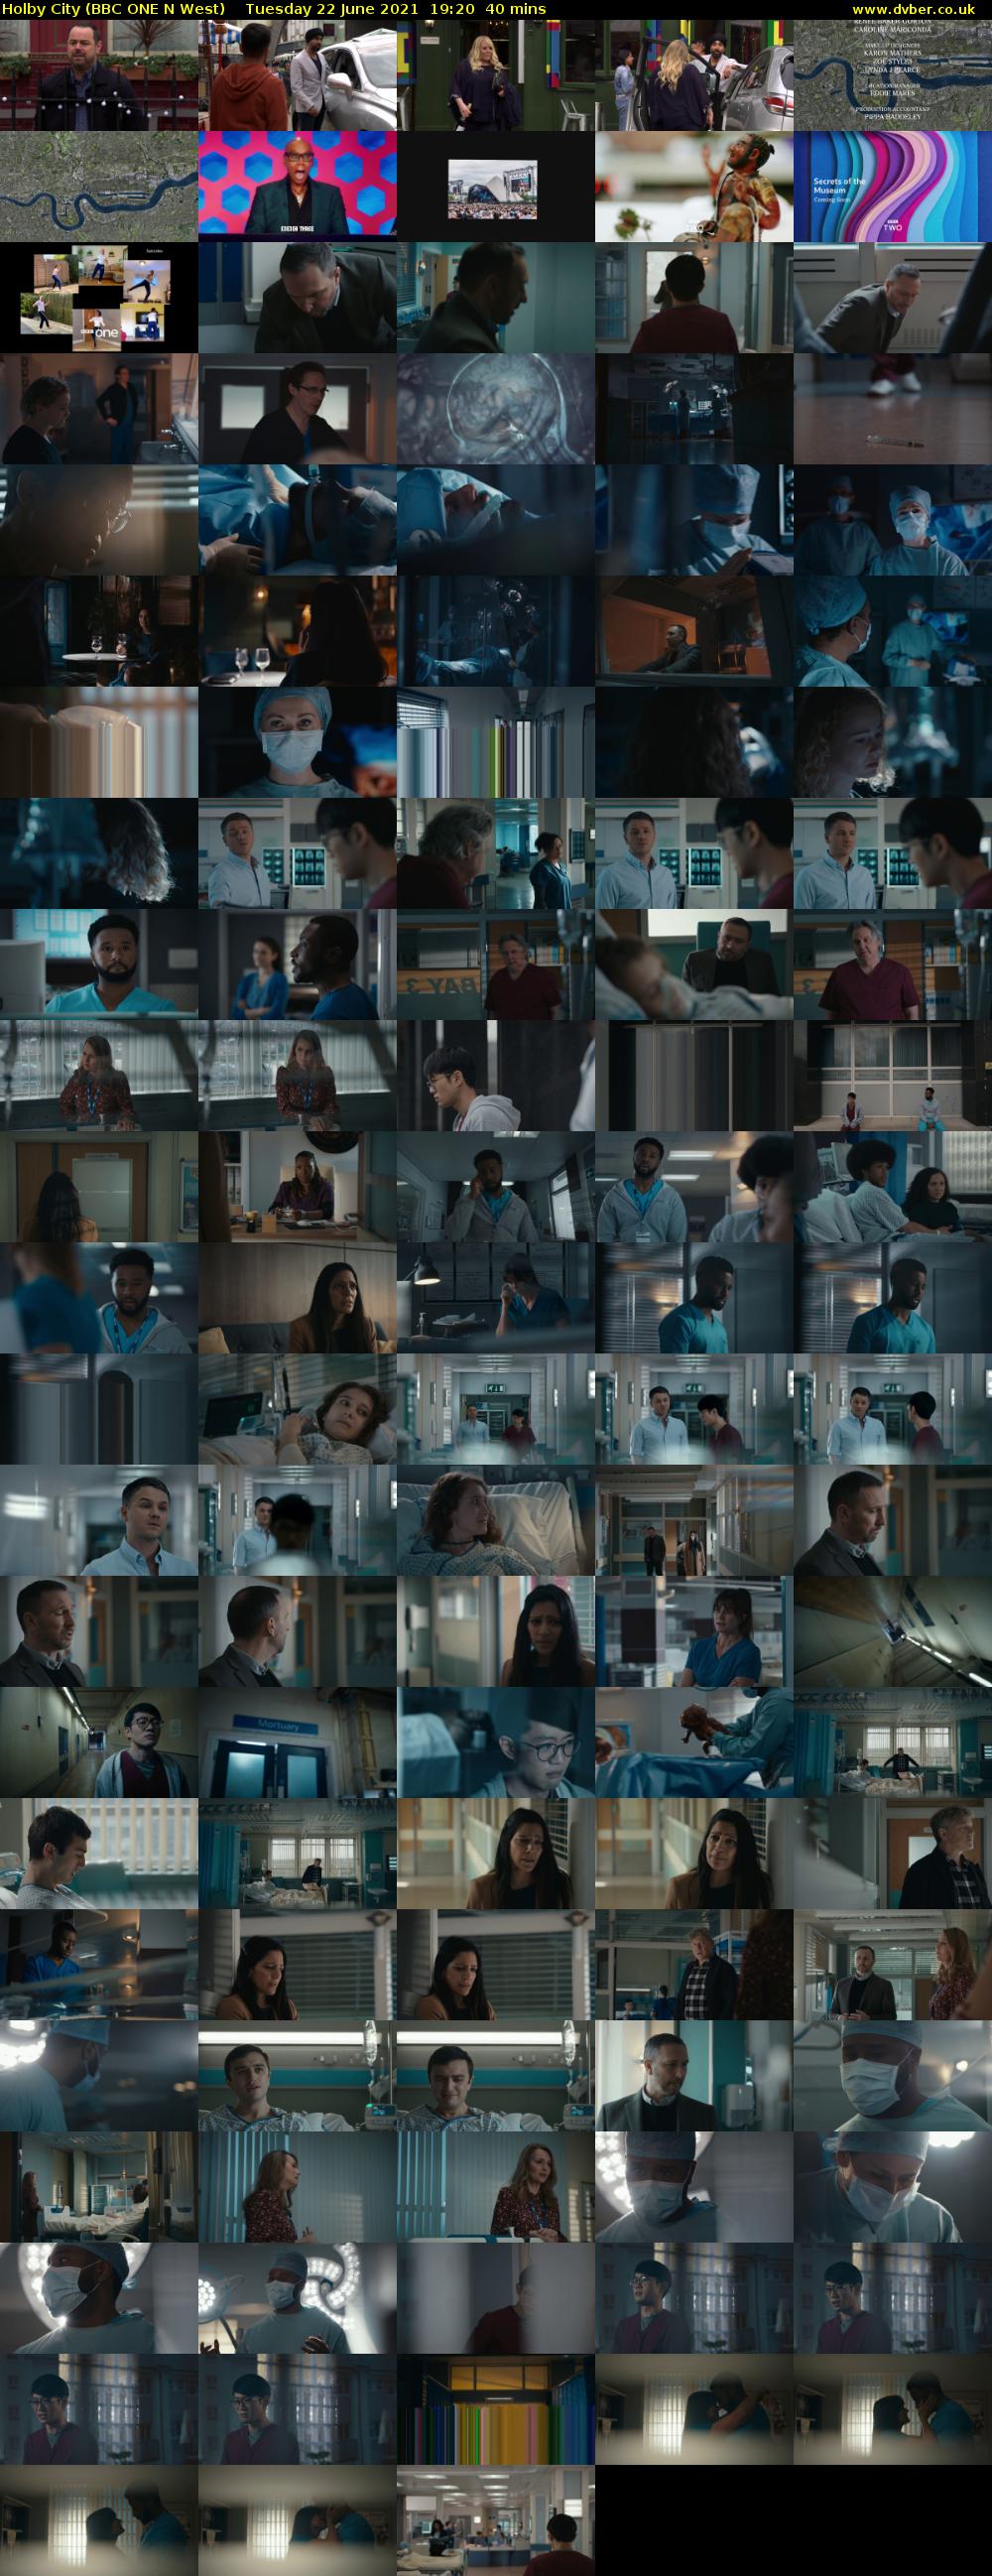 Holby City (BBC ONE N West) Tuesday 22 June 2021 19:20 - 20:00